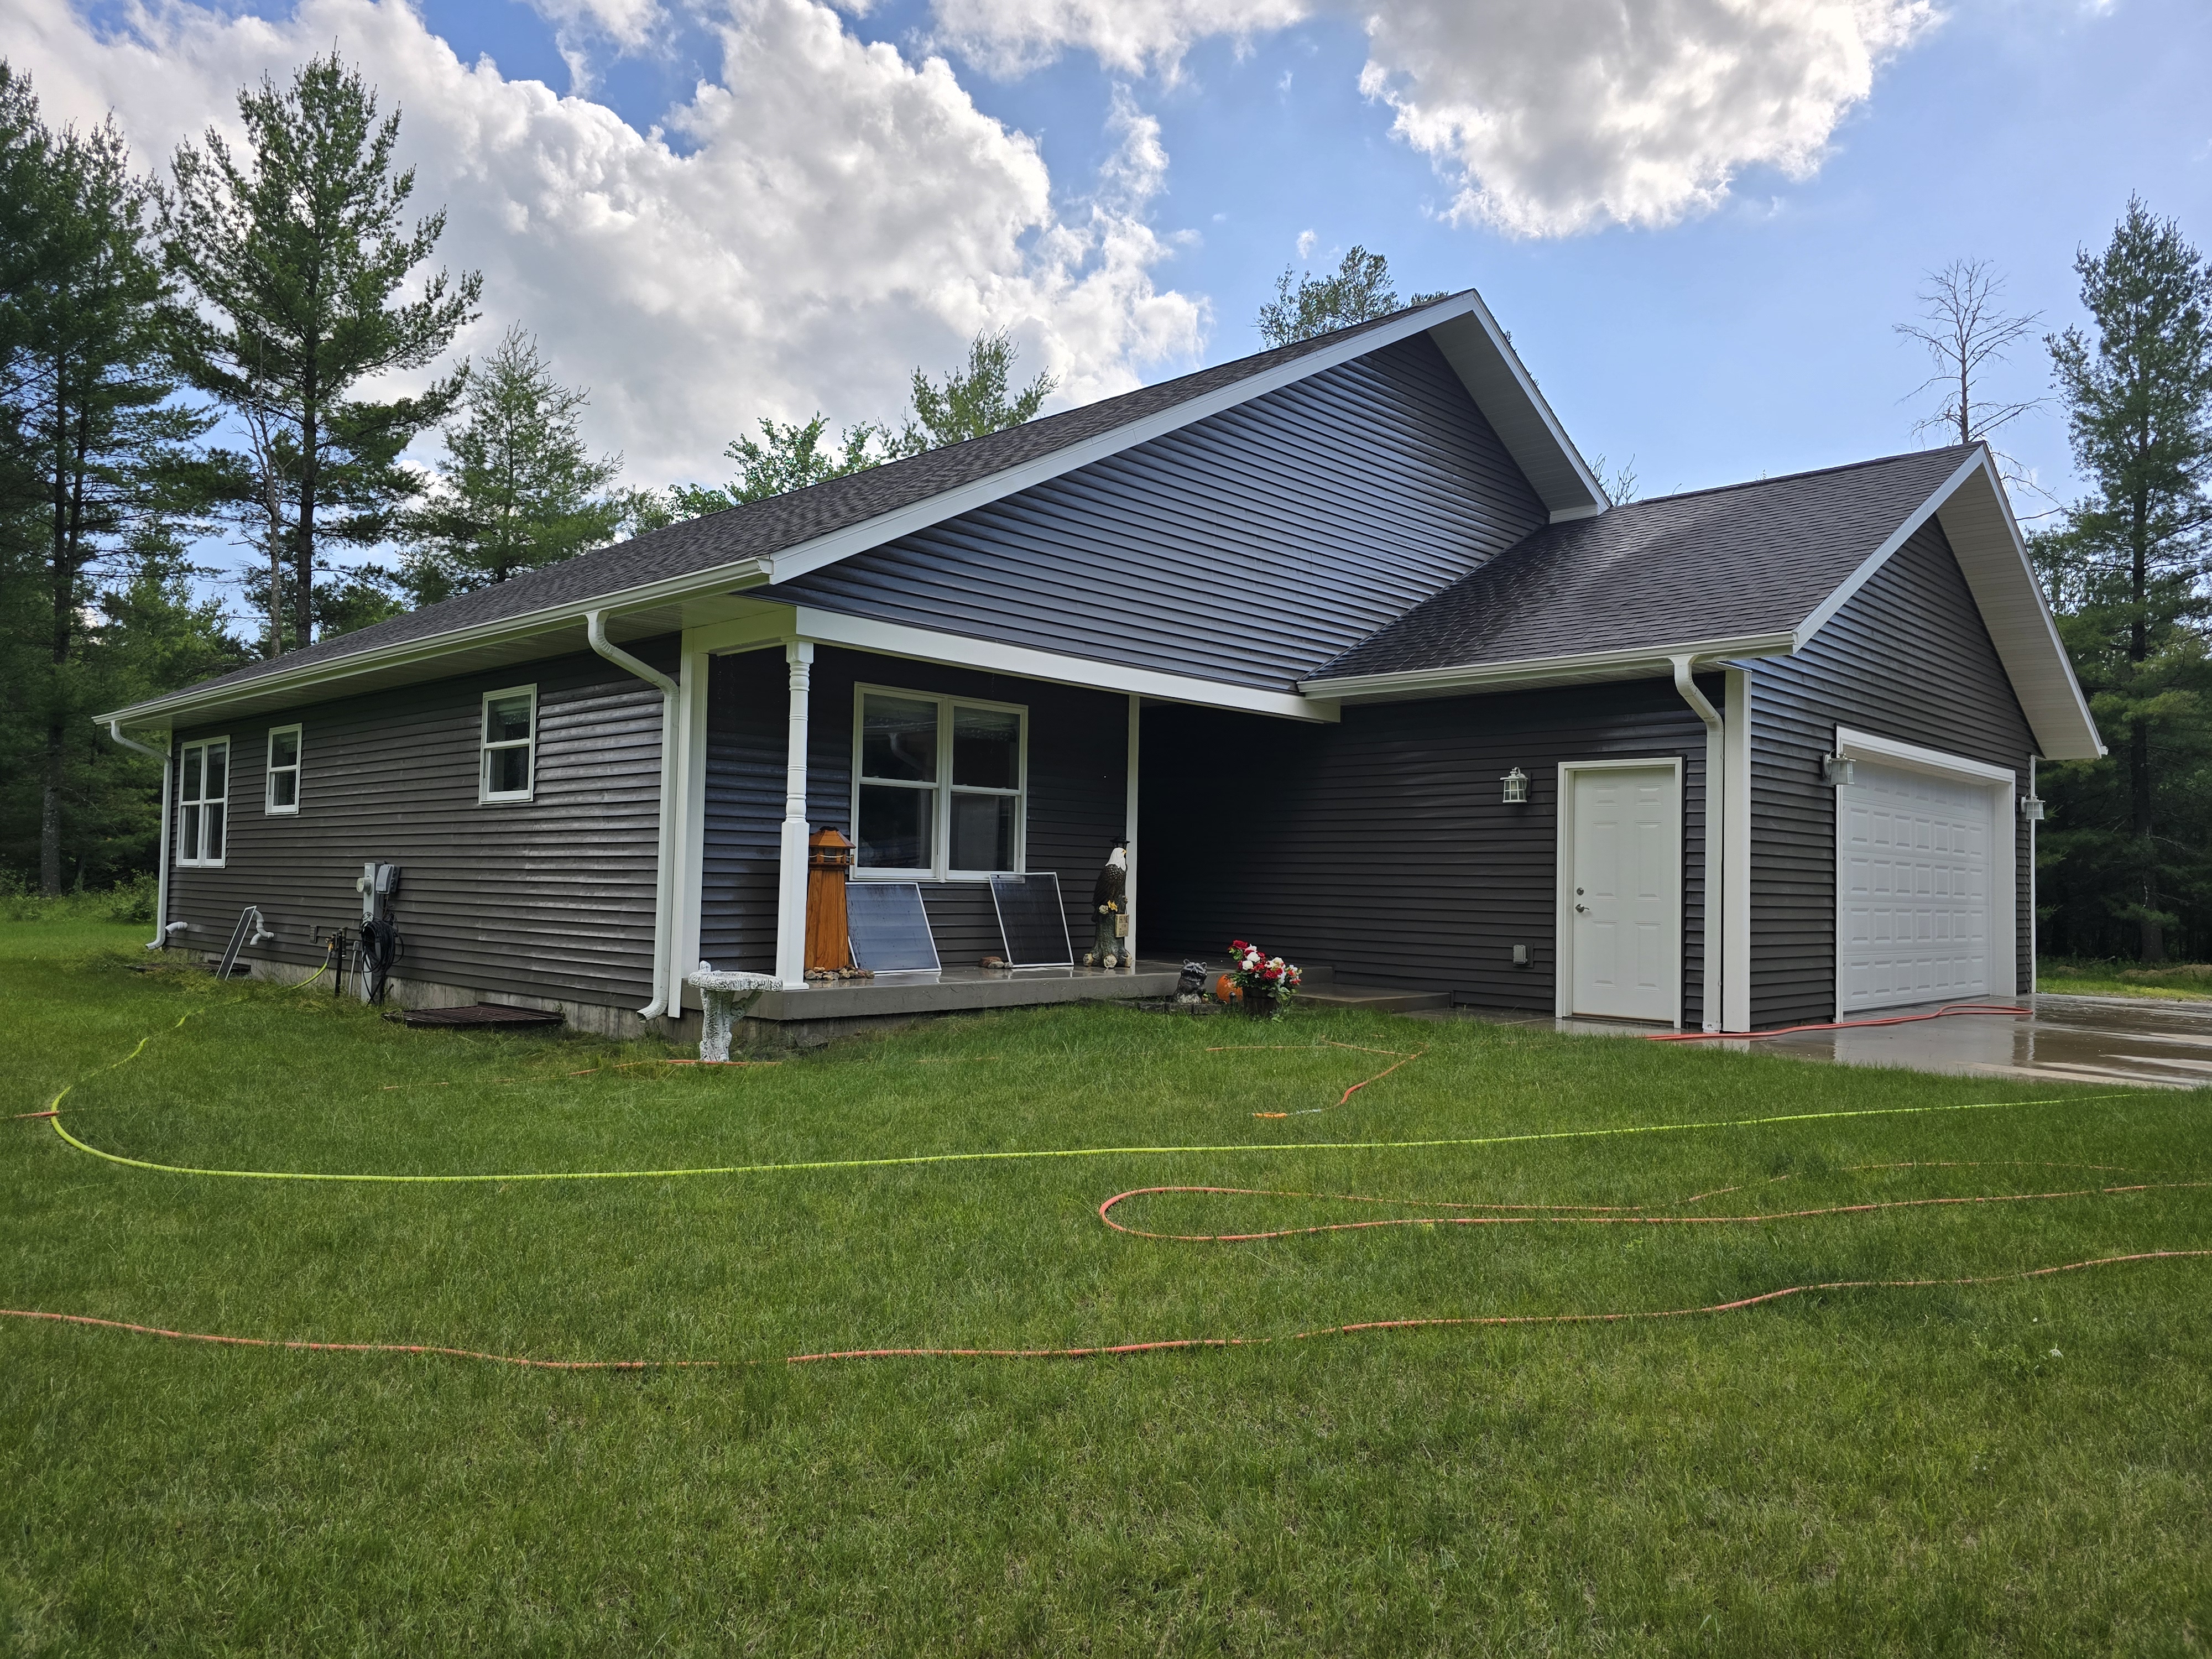 Top Quality House Washing and Interior Exterior Window Cleaning performed in and around Nekoosa, WI